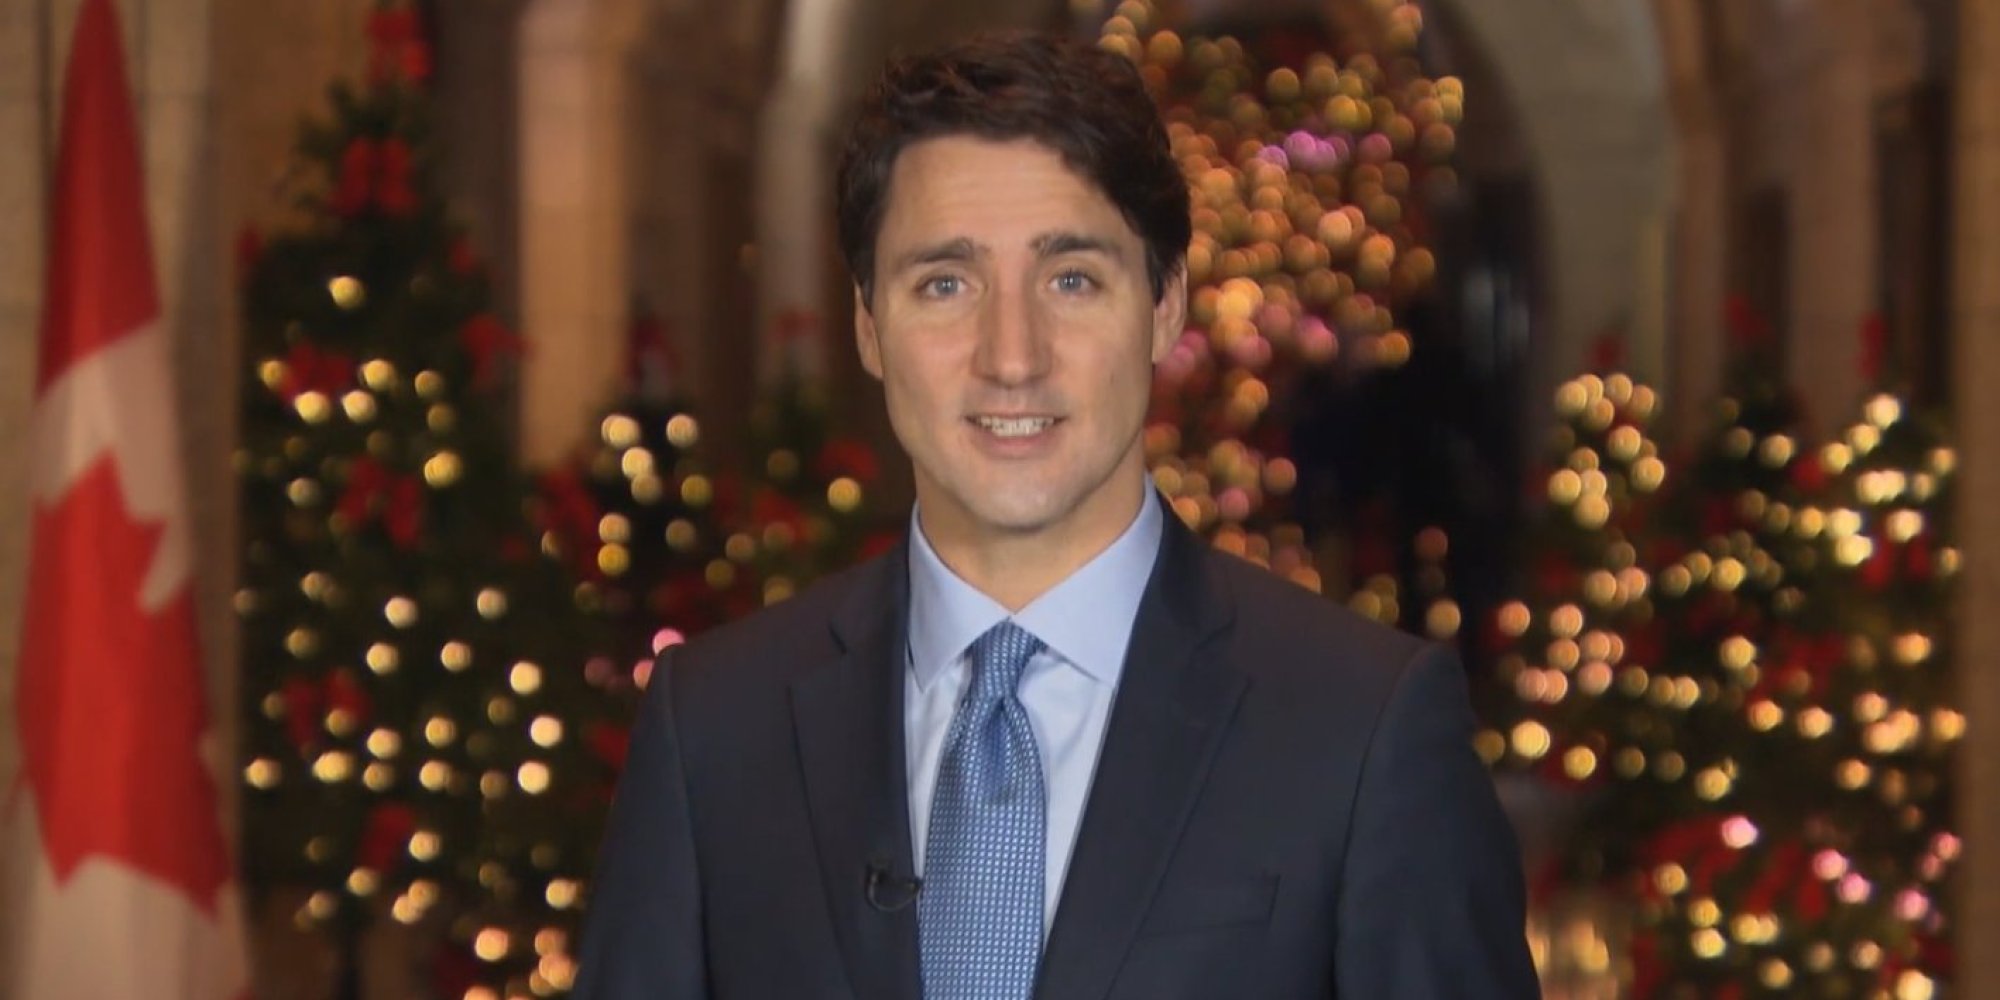 Trudeau Holiday Message Canada Is At Its Best In Difficult Times, PM Says